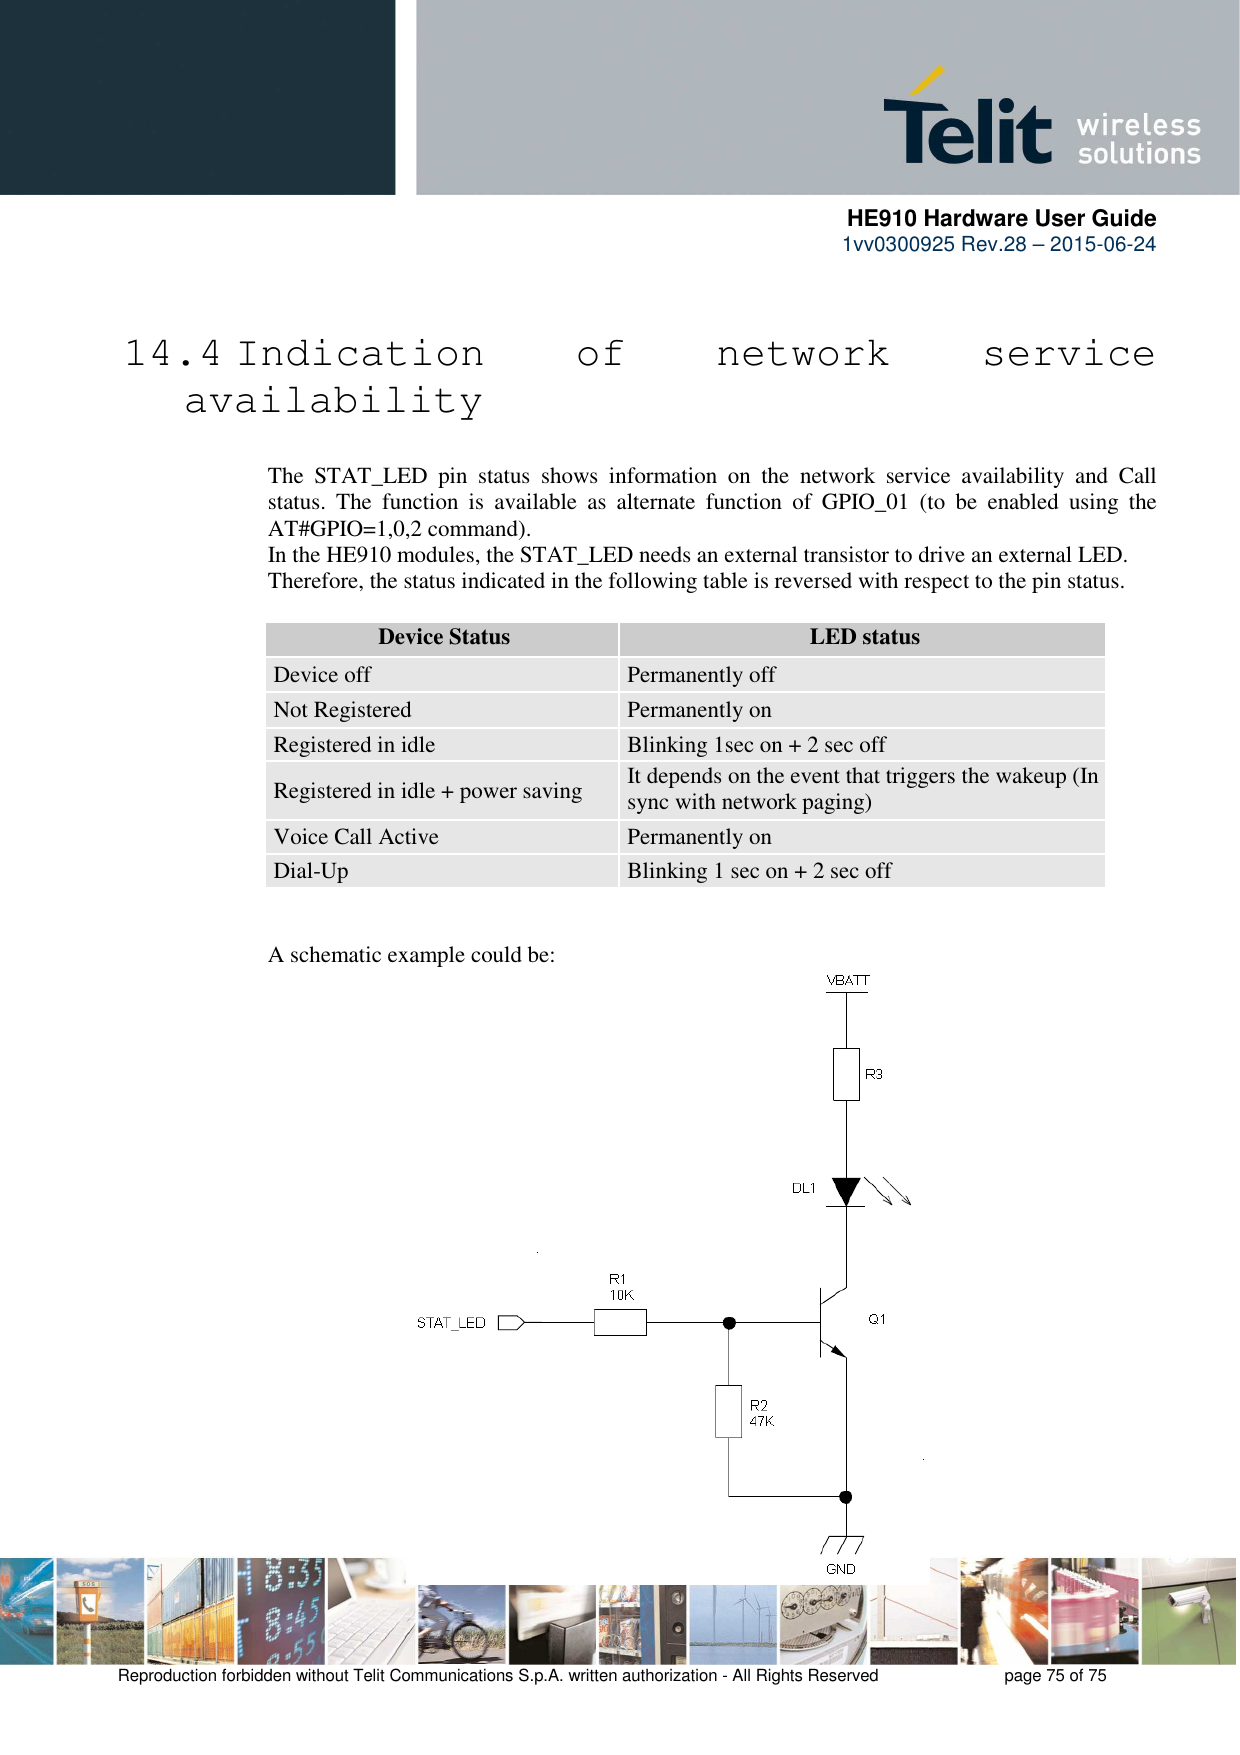      HE910 Hardware User Guide 1vv0300925 Rev.28 – 2015-06-24    Reproduction forbidden without Telit Communications S.p.A. written authorization - All Rights Reserved    page 75 of 75  14.4 Indication  of  network  service availability  The  STAT_LED  pin  status  shows  information  on  the  network  service  availability  and  Call status.  The  function  is  available  as  alternate  function  of  GPIO_01  (to  be  enabled  using  the AT#GPIO=1,0,2 command). In the HE910 modules, the STAT_LED needs an external transistor to drive an external LED. Therefore, the status indicated in the following table is reversed with respect to the pin status.  Device Status LED status Device off  Permanently off Not Registered  Permanently on Registered in idle  Blinking 1sec on + 2 sec off Registered in idle + power saving It depends on the event that triggers the wakeup (In sync with network paging) Voice Call Active  Permanently on Dial-Up  Blinking 1 sec on + 2 sec off   A schematic example could be:     